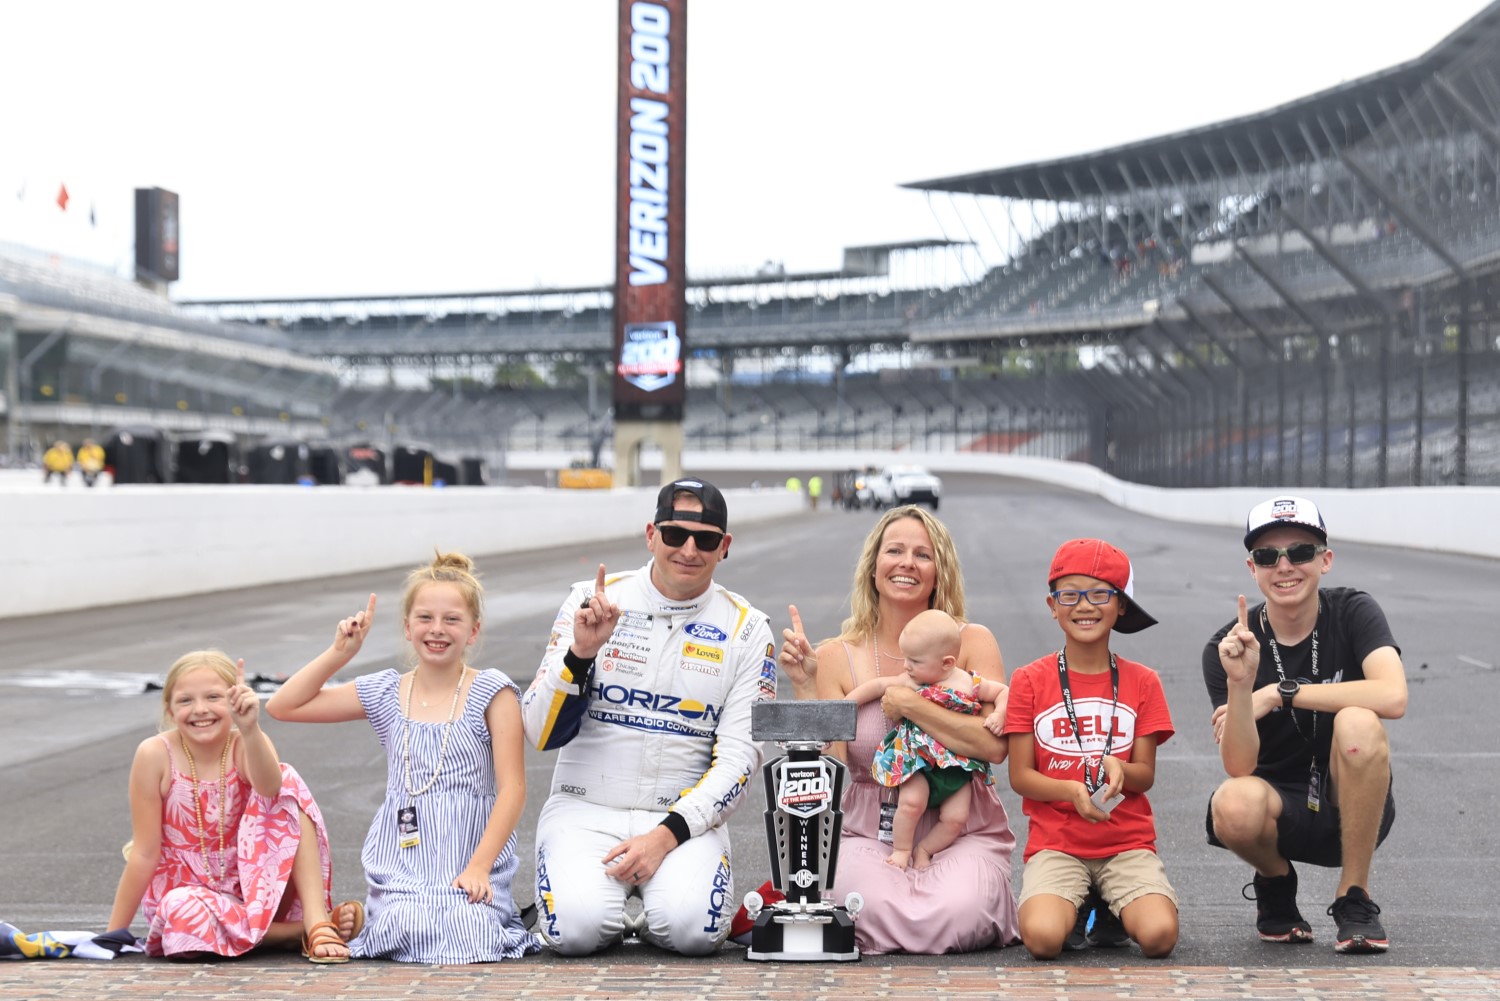 Michael McDowell, driver of the #34 Horizon Hobby Ford, and his family celebrate at the bricks on track after winning the NASCAR Cup Series Verizon 200 at the Brickyard at Indianapolis Motor Speedway on August 13, 2023 in Indianapolis, Indiana. (Photo by Justin Casterline/Getty Images)